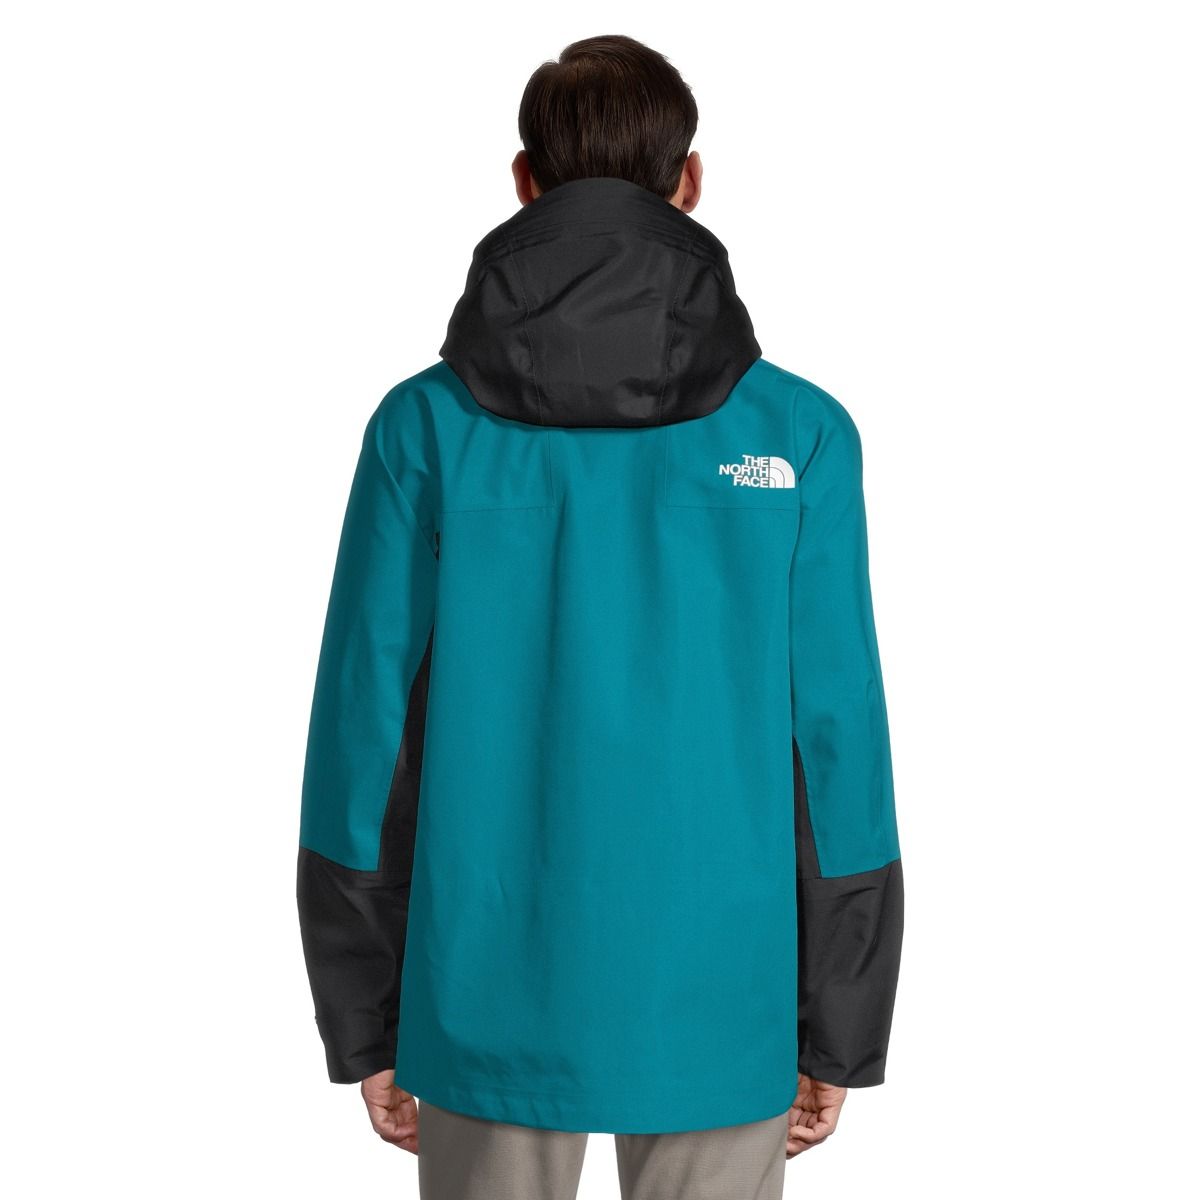 The North Face Men's Ceptor 3L Shell Jacket